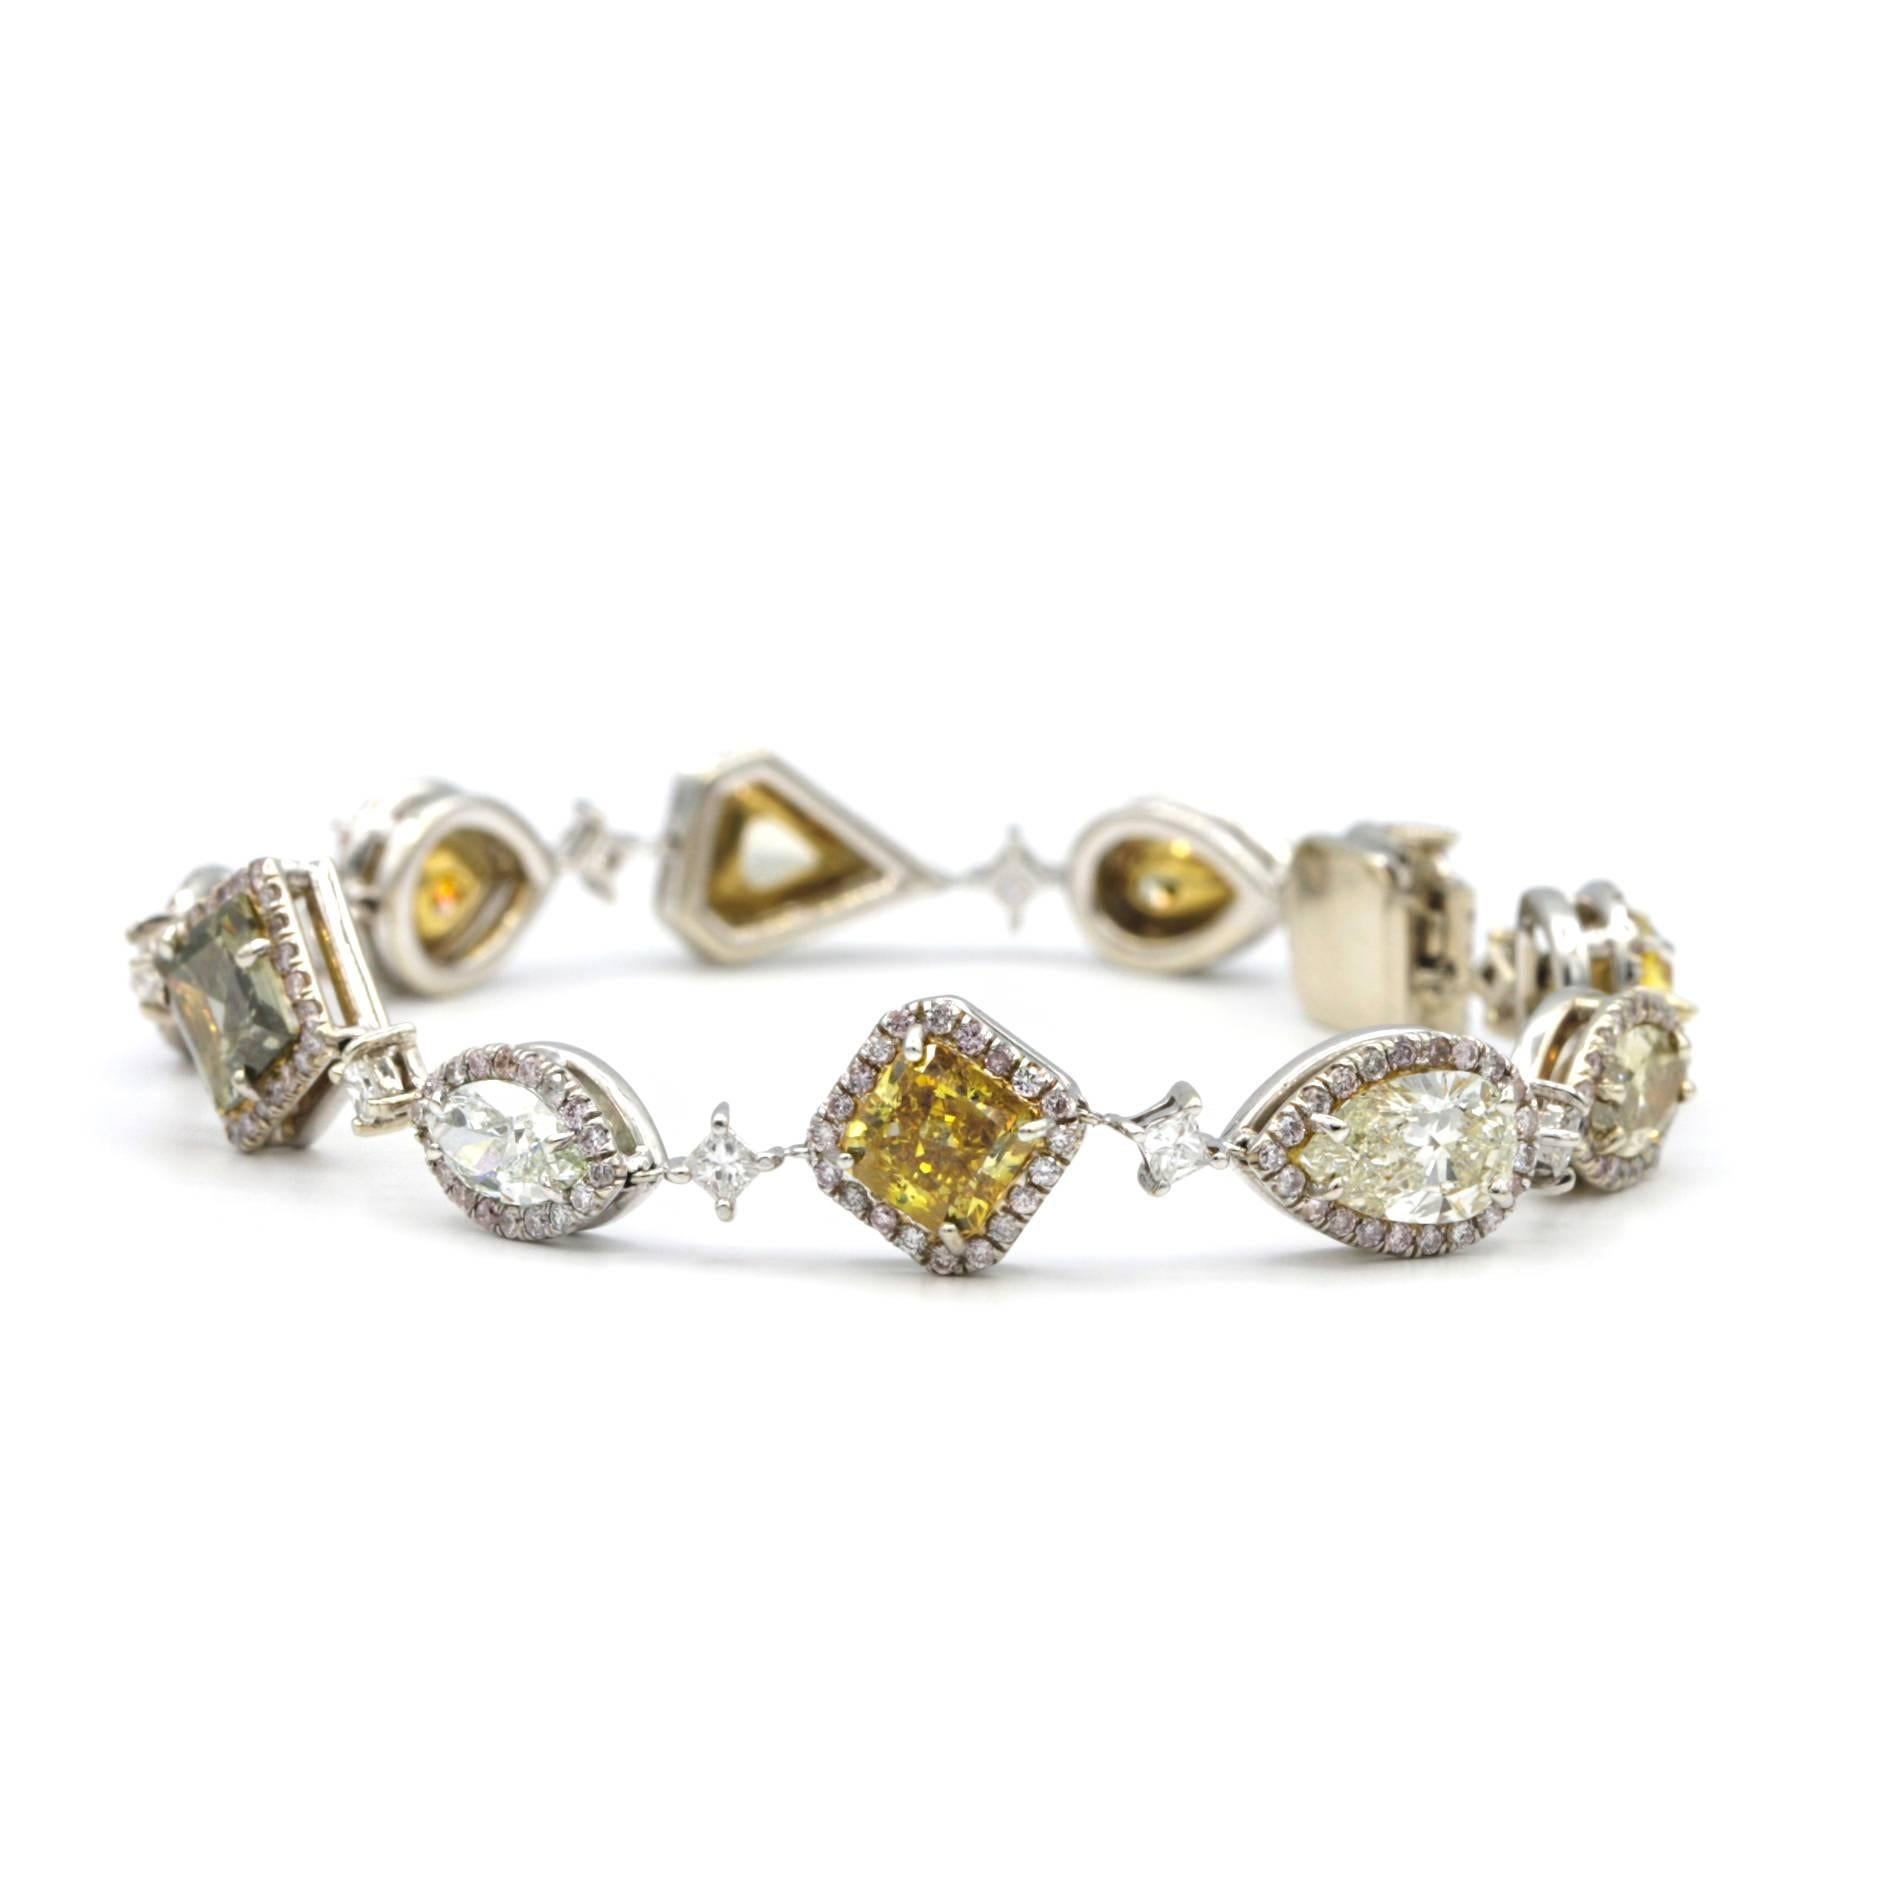 Absolutely stunning bracelet!
features 10 different fancy colored diamonds GIA certified:
Square Modified Brilliant 1.15ct Fancy Deep Brownish Orangy Yellow, 
Marquise Brilliant 0.52ct Fancy Light Yellowish Green VVS2, 
Marquise Brilliant 0.52ct